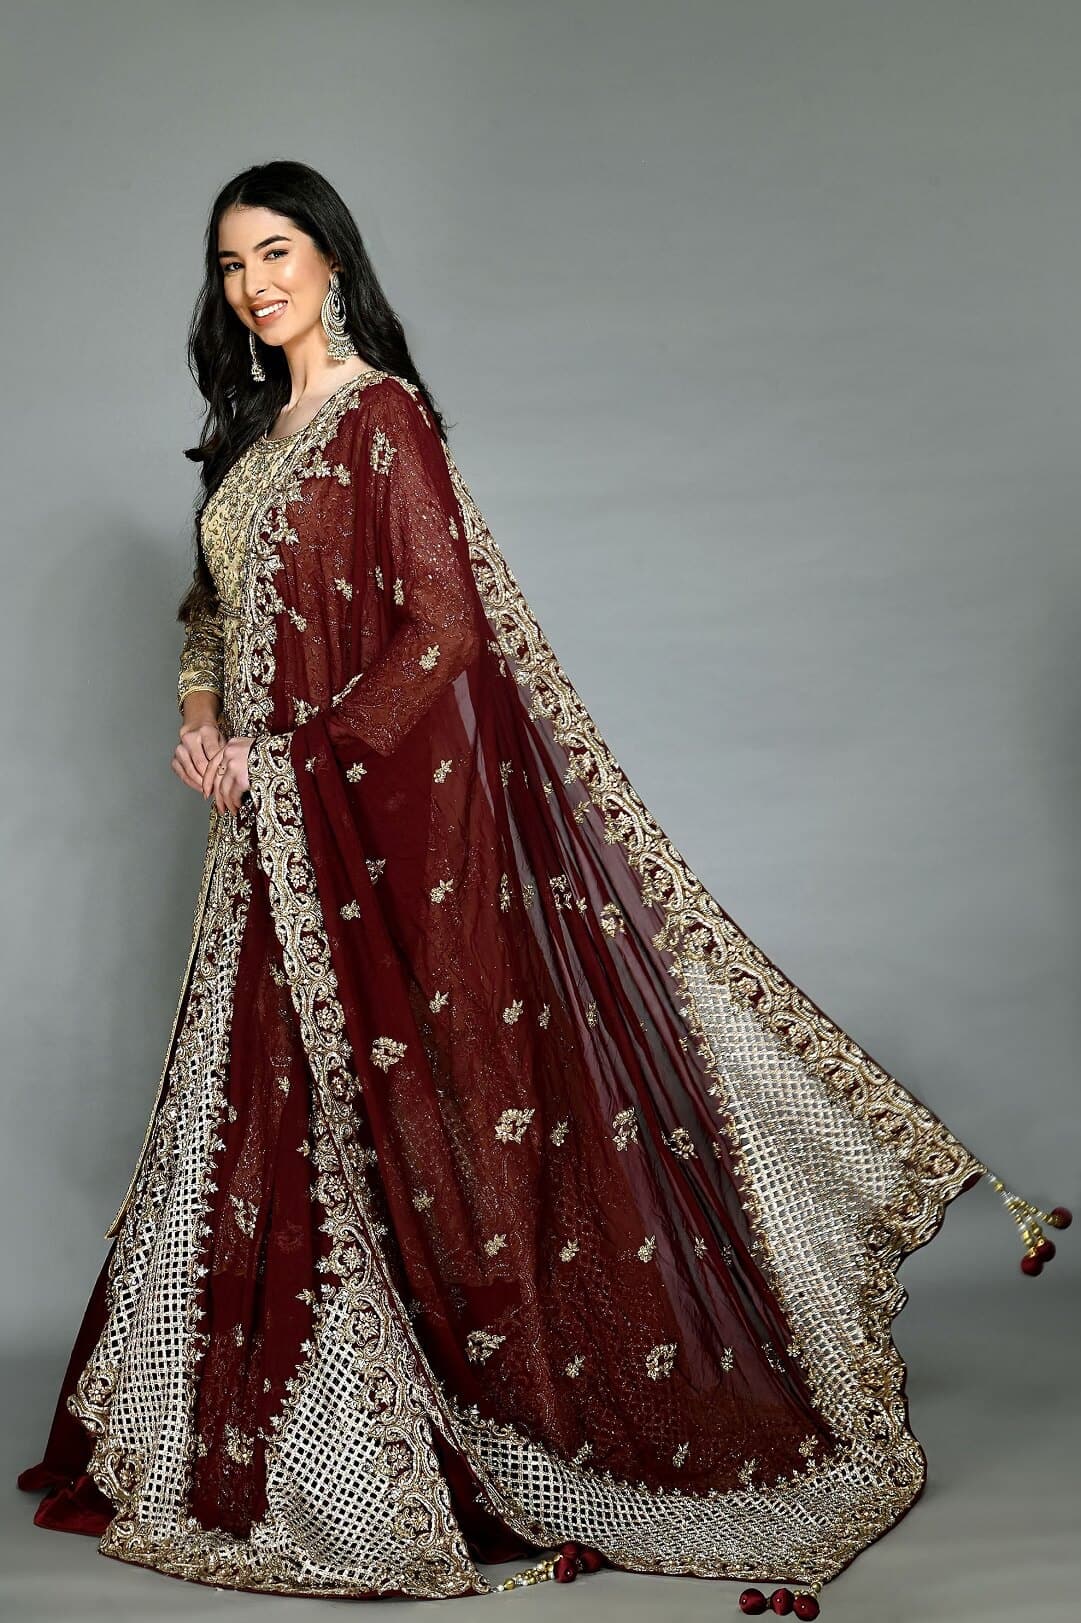 Multicolor Maroon & Peach Velvet Bridal Lehenga Choli With Zari Embroidery,  Size: 40 To 44 at Rs 14000 in Surat